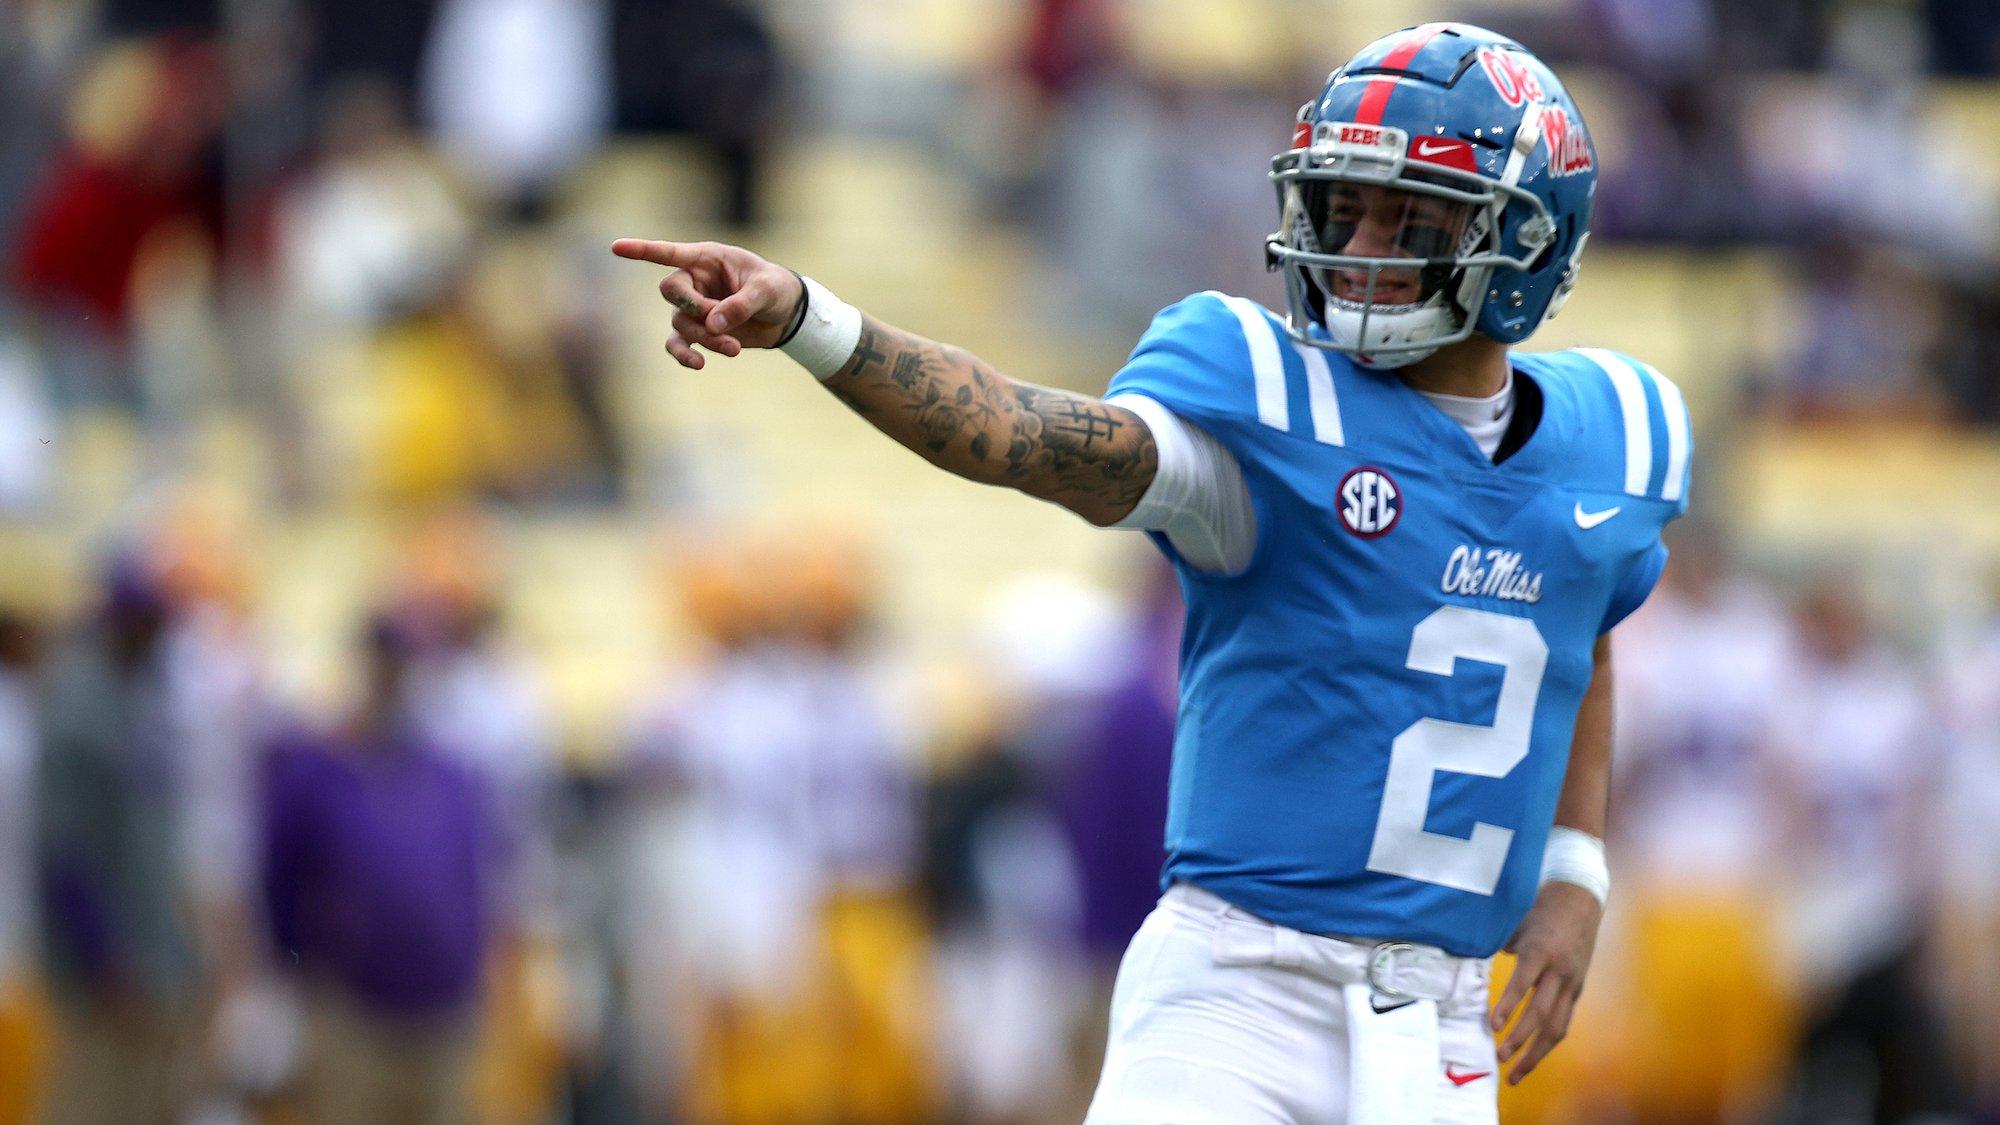 Ole Miss Rebels vs Auburn Tigers Betting Preview: Rebels to Outlast Tigers in SEC West Shootout